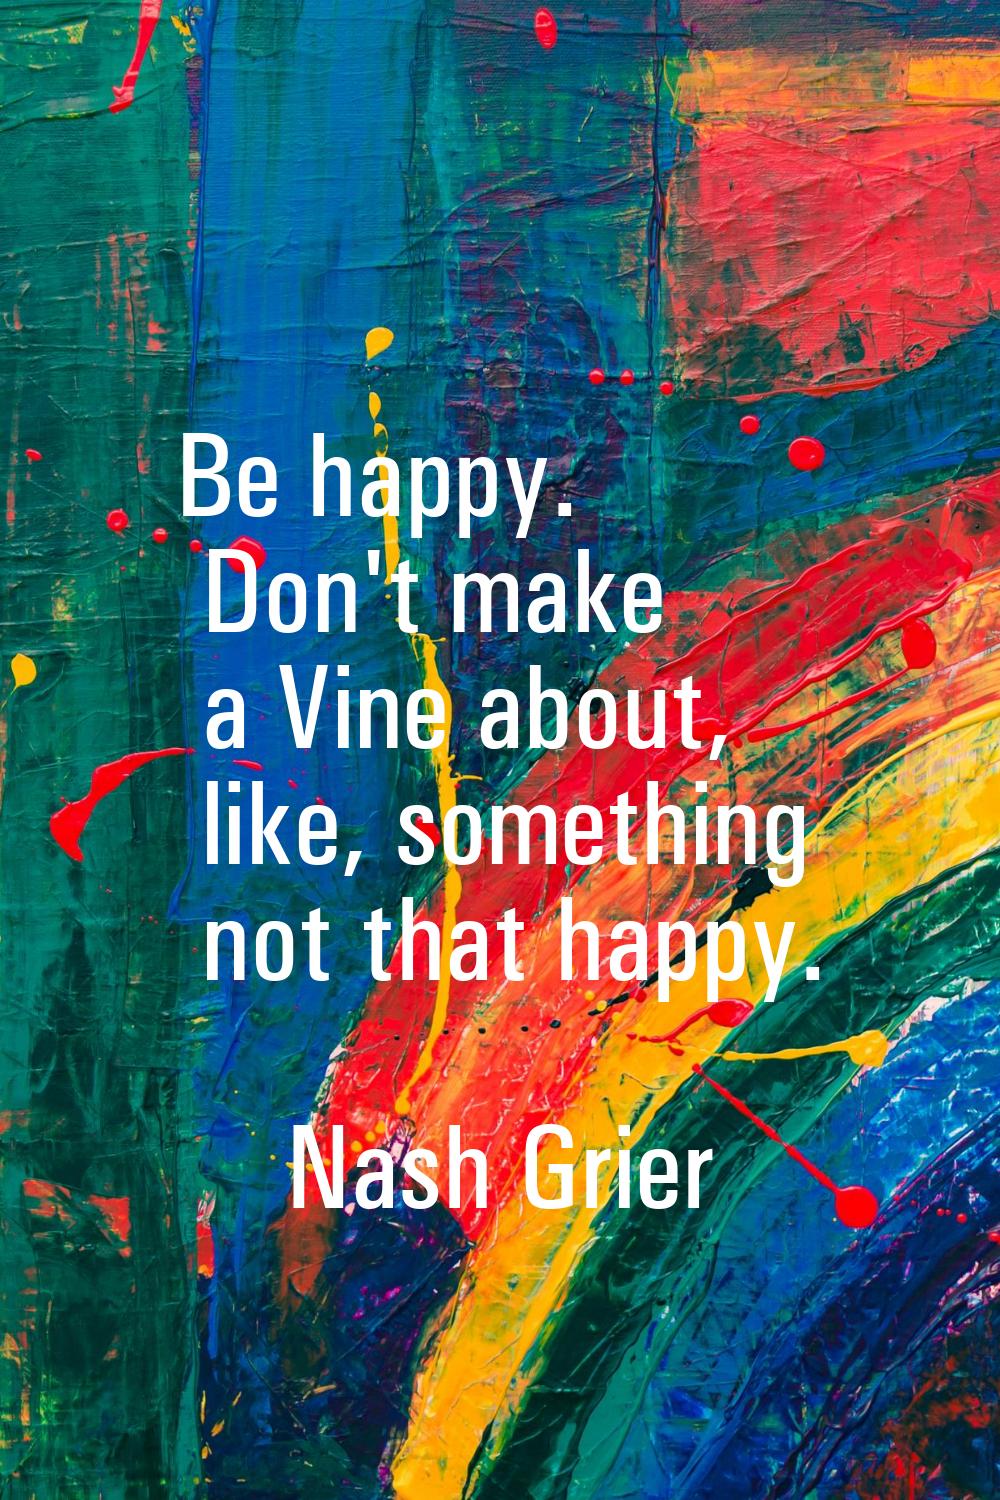 Be happy. Don't make a Vine about, like, something not that happy.